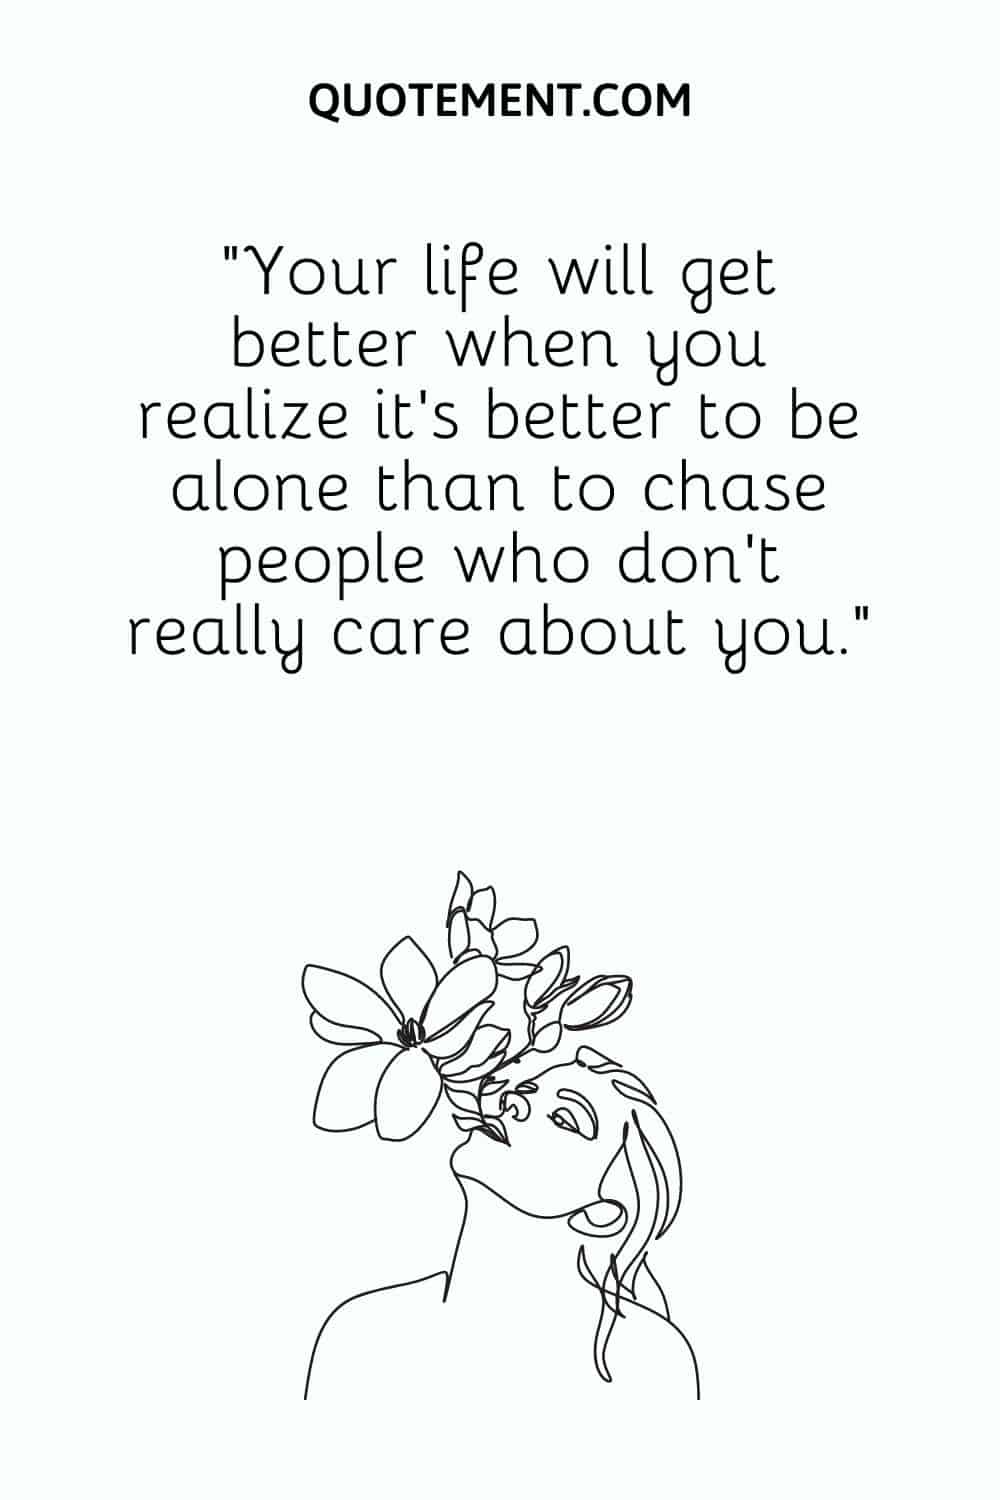 Your life will get better when you realize it’s better to be alone than to chase people who don’t really care about you